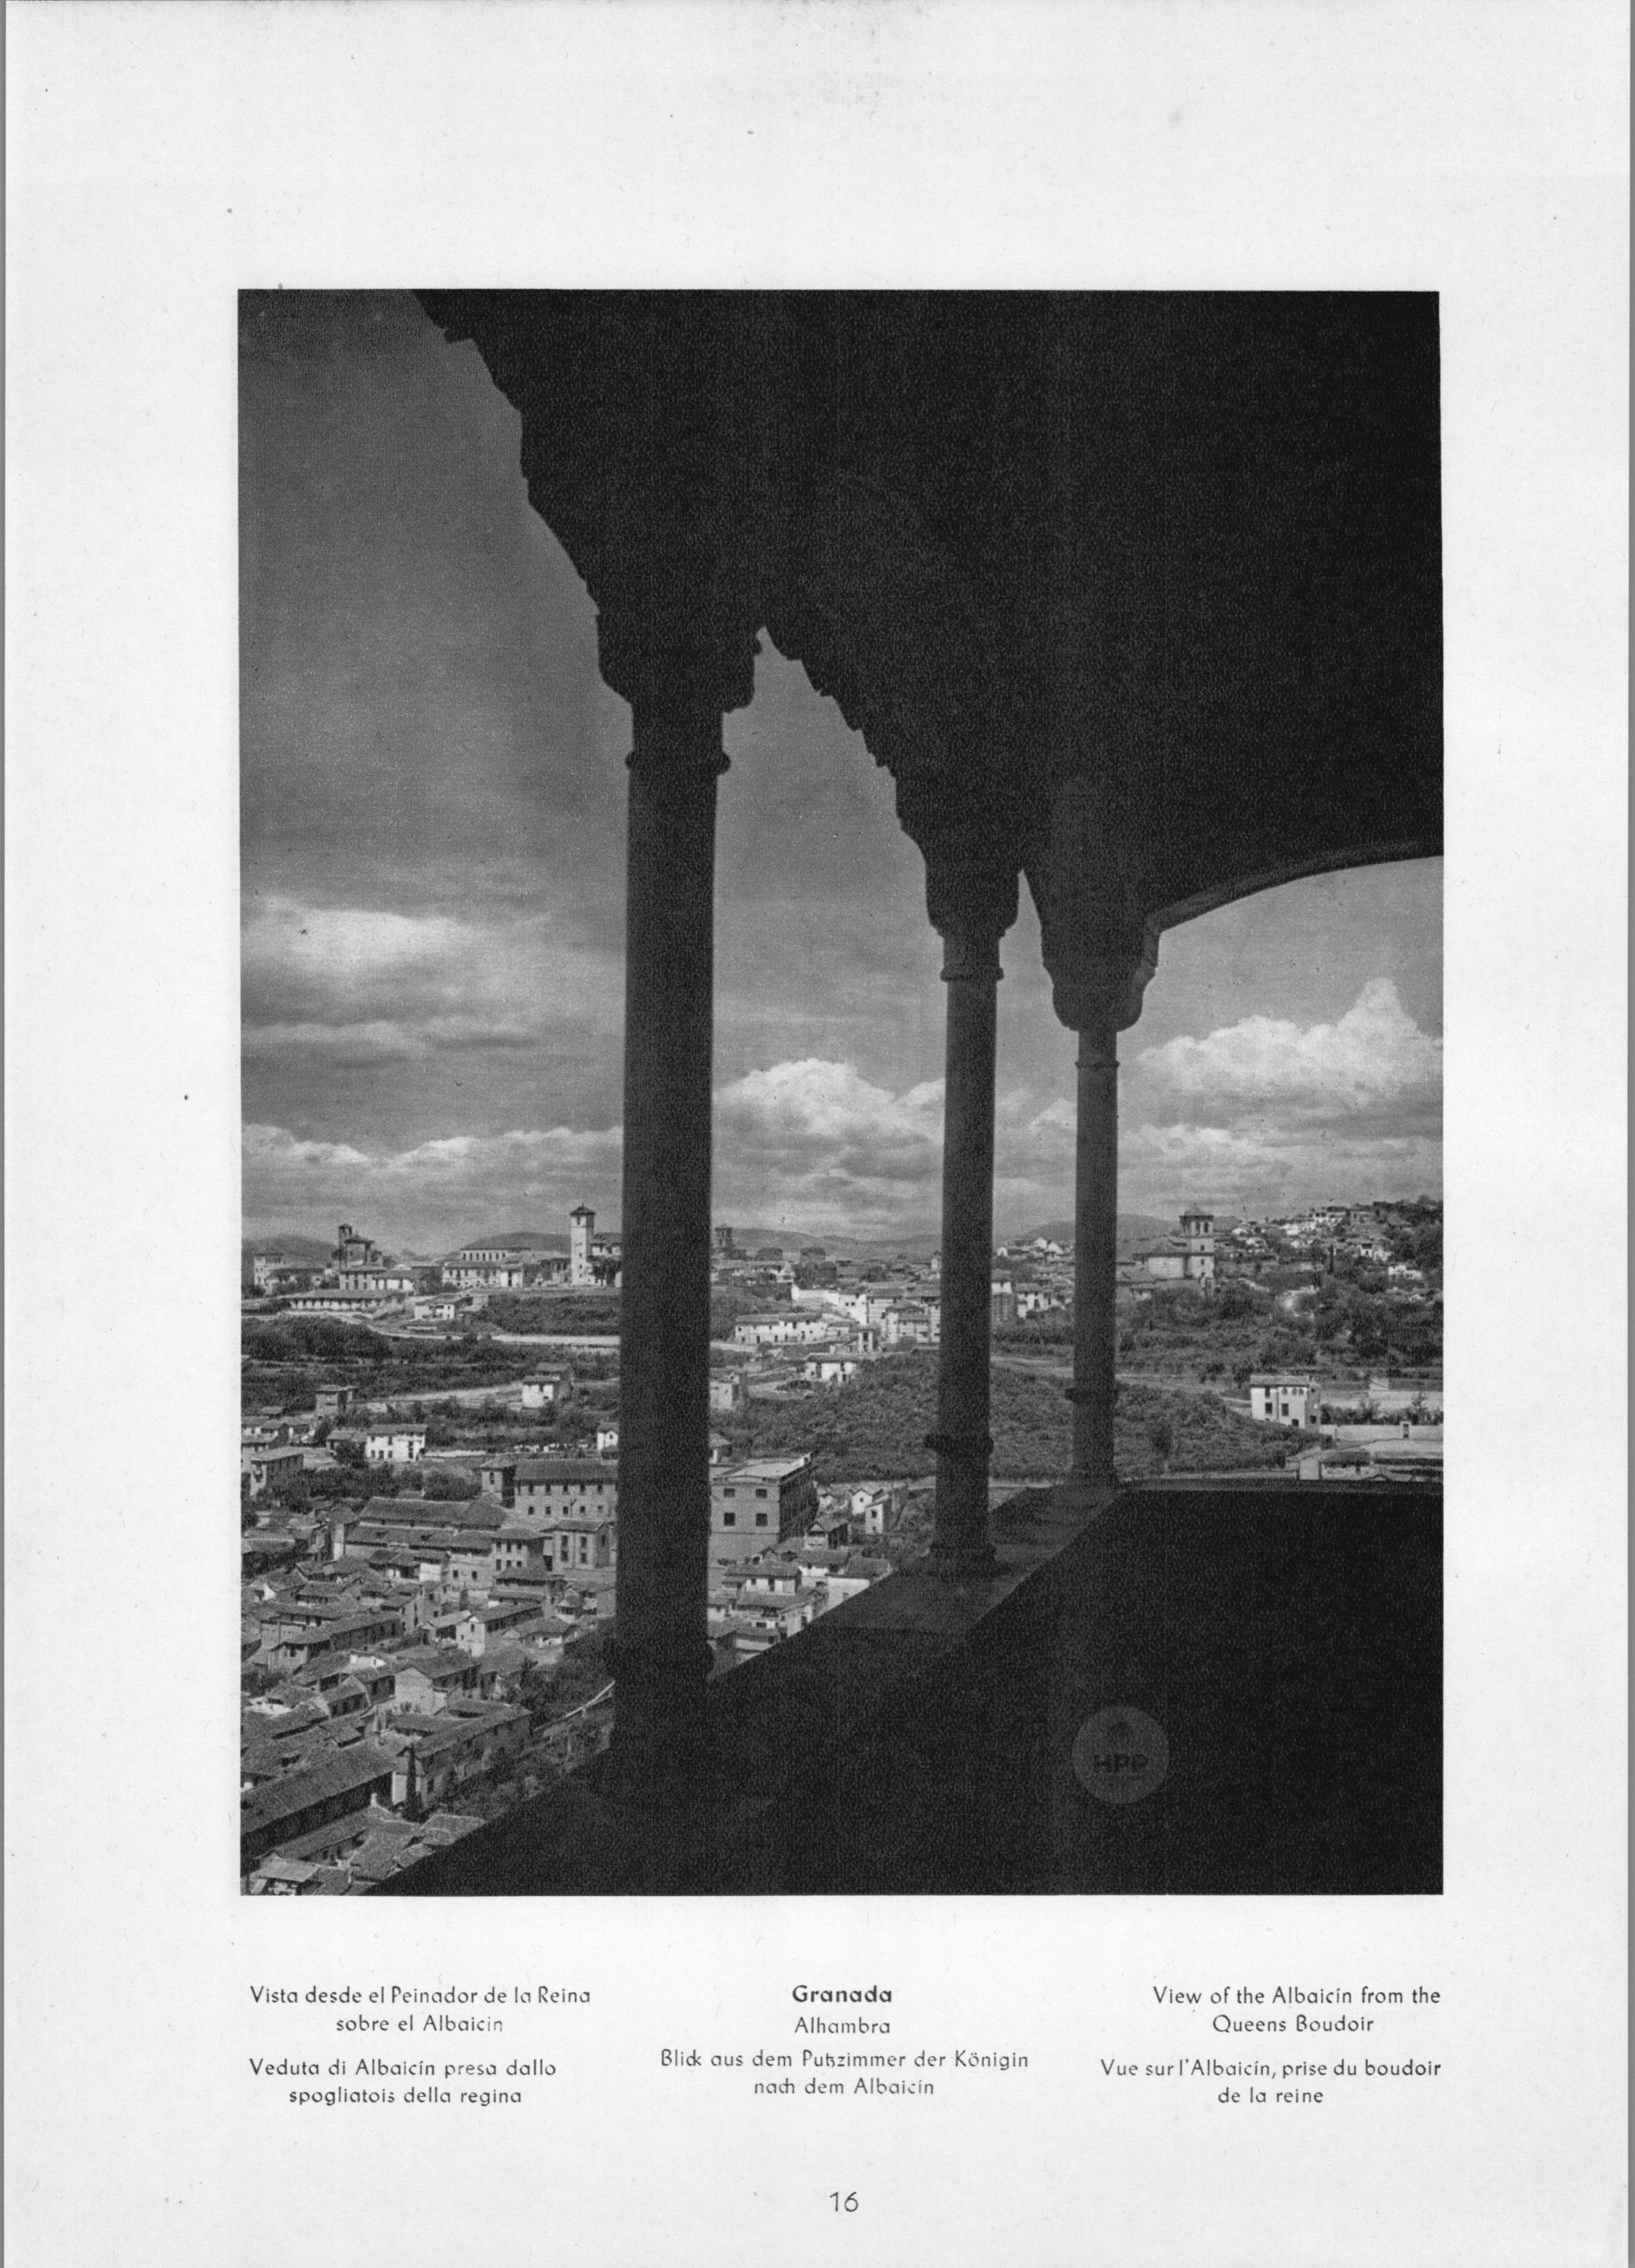 Granada Alhambra - View of the Albaicin from the Queens Boudoir